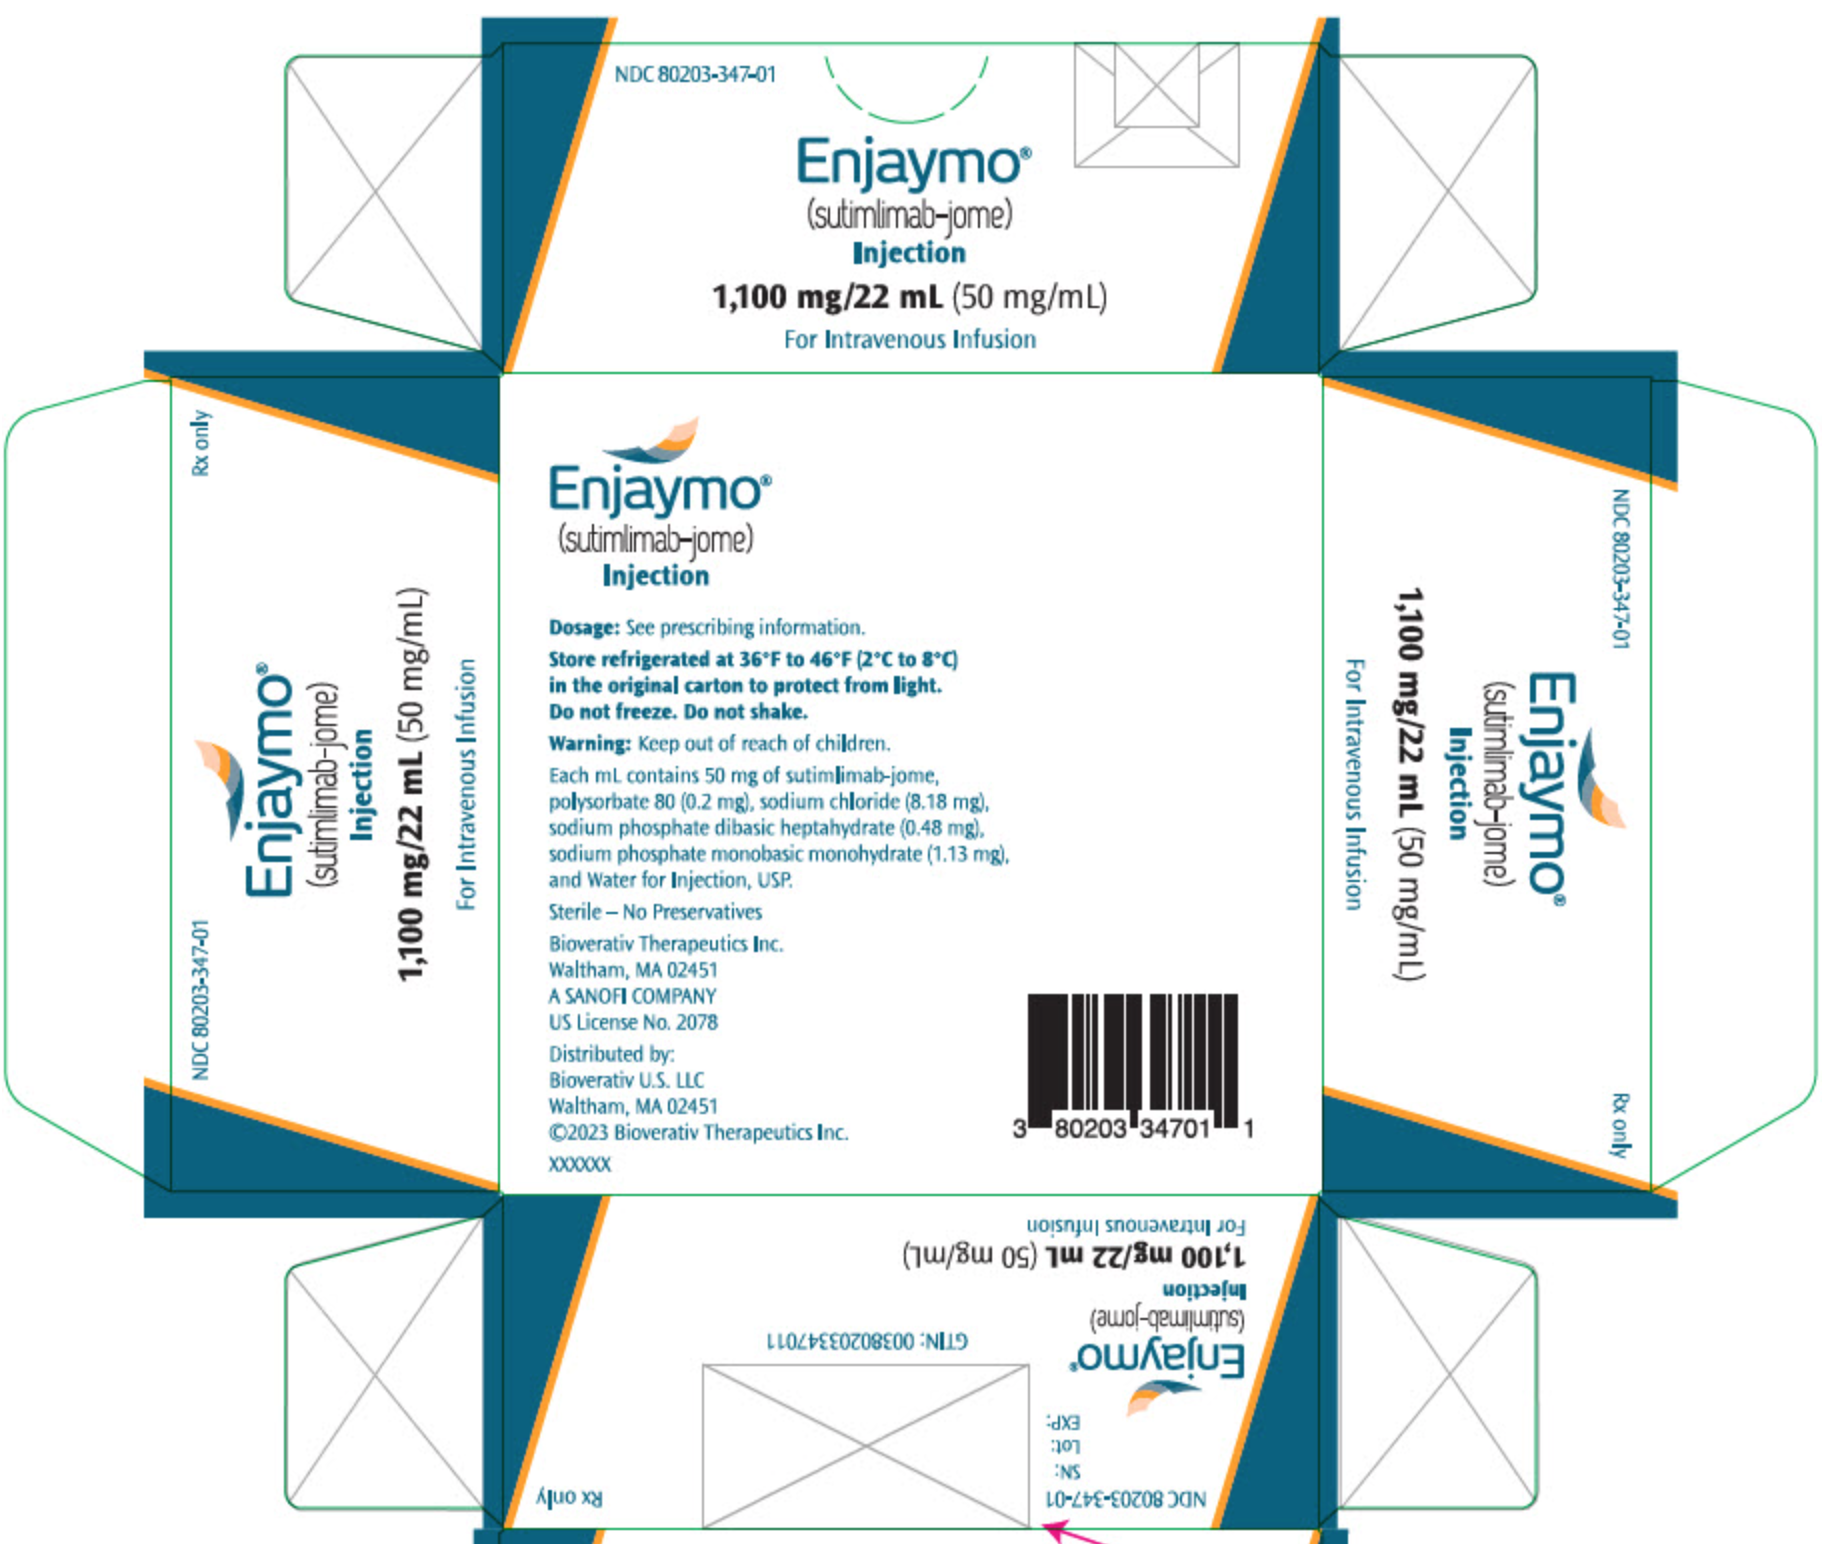 File:Sutimlimab-jome packaging.png